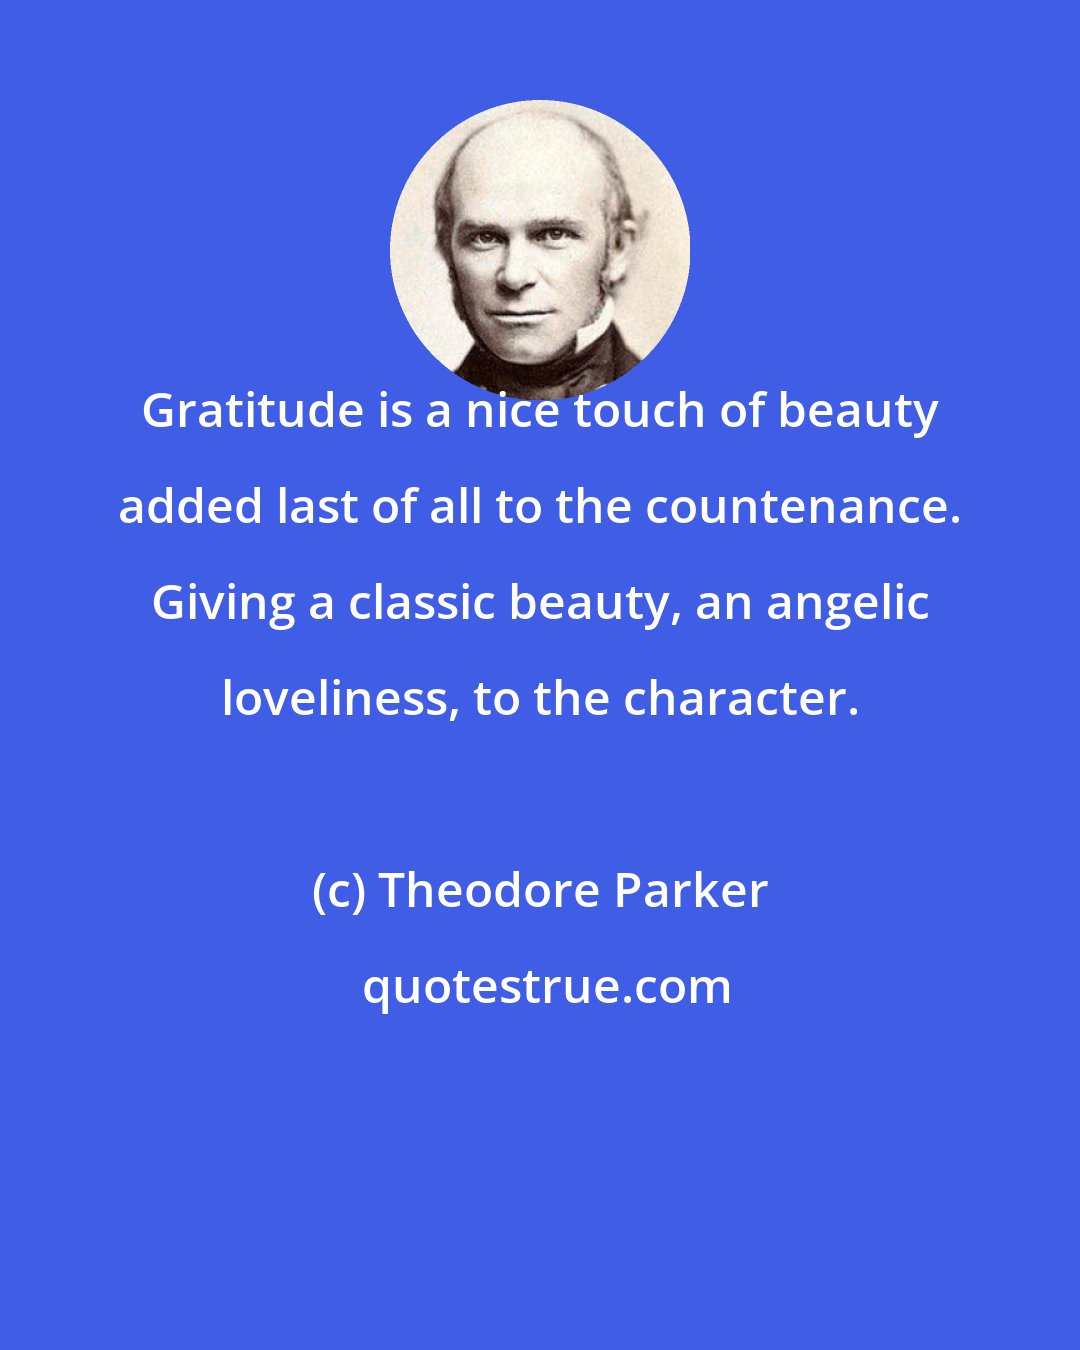 Theodore Parker: Gratitude is a nice touch of beauty added last of all to the countenance. Giving a classic beauty, an angelic loveliness, to the character.